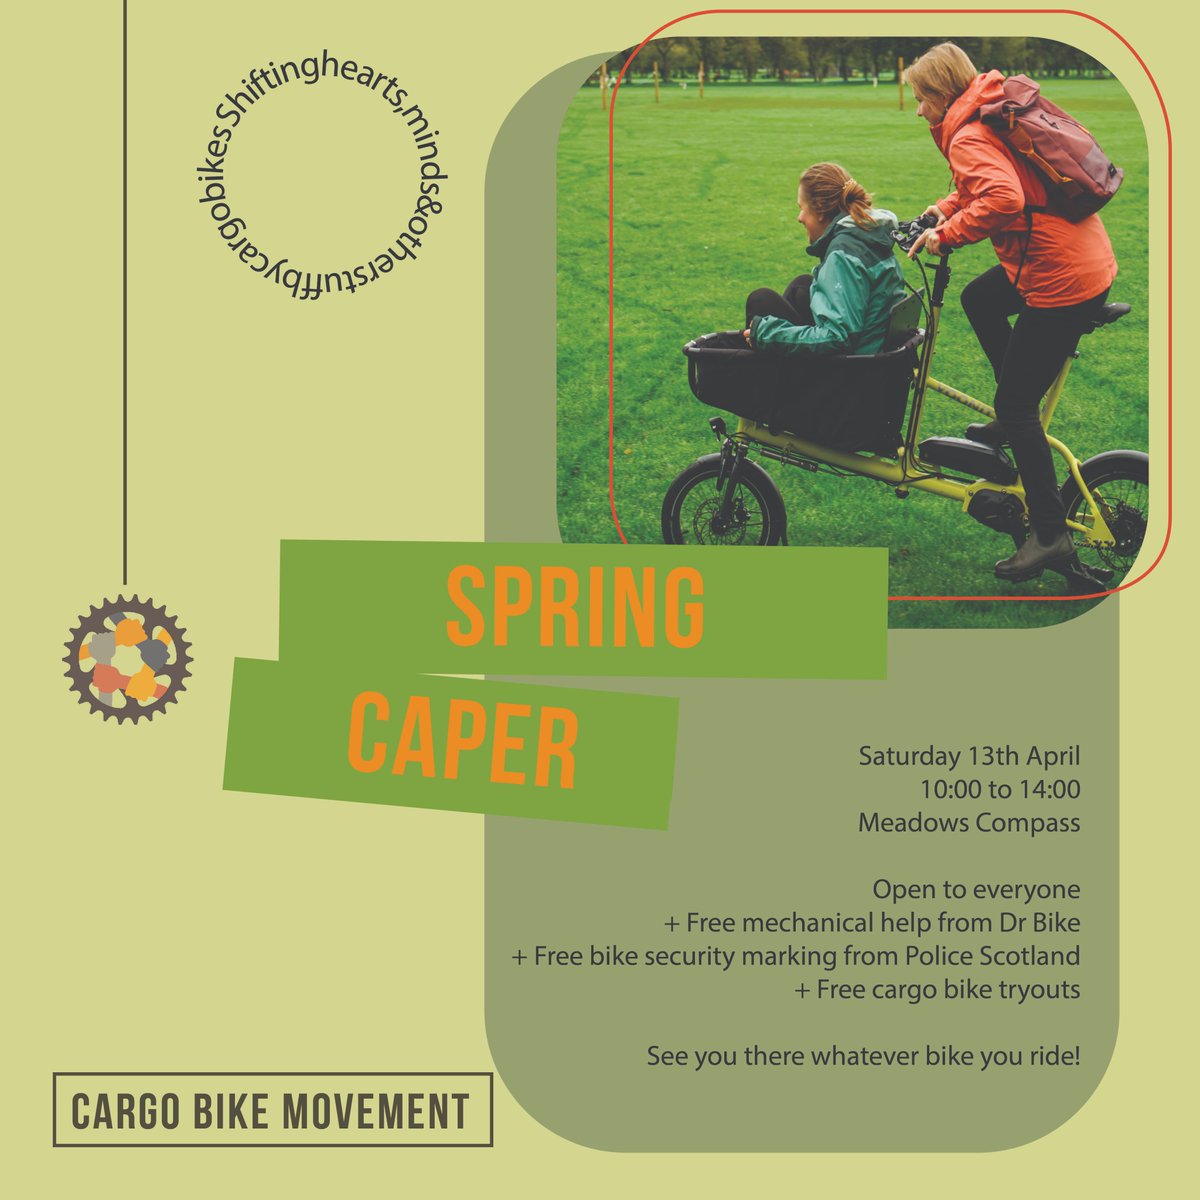 Saturday 13th April 10:00 to 14:00 Meadows Compass Open to everyone + Free mechanical help from Dr Bike + Free bike security marking from Police Scotland + Free cargo bike try-outs See you there whatever bike you ride!